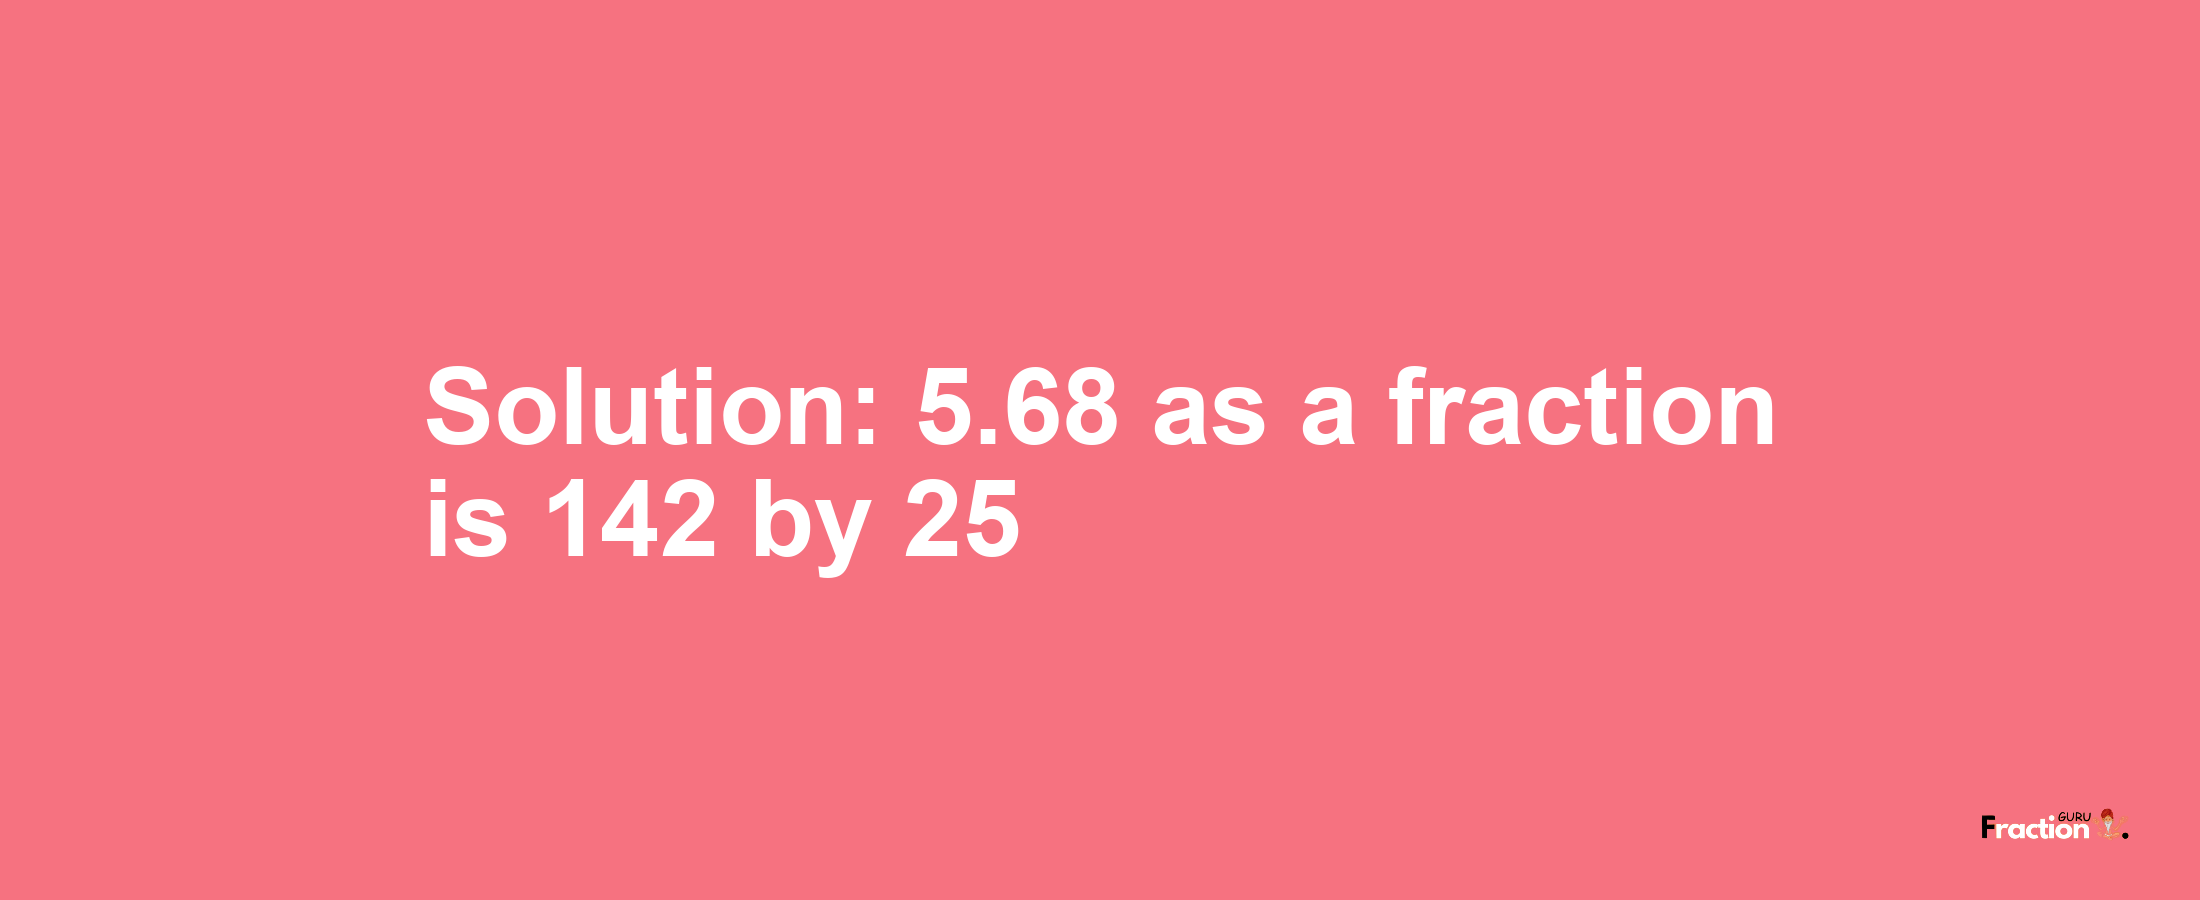 Solution:5.68 as a fraction is 142/25